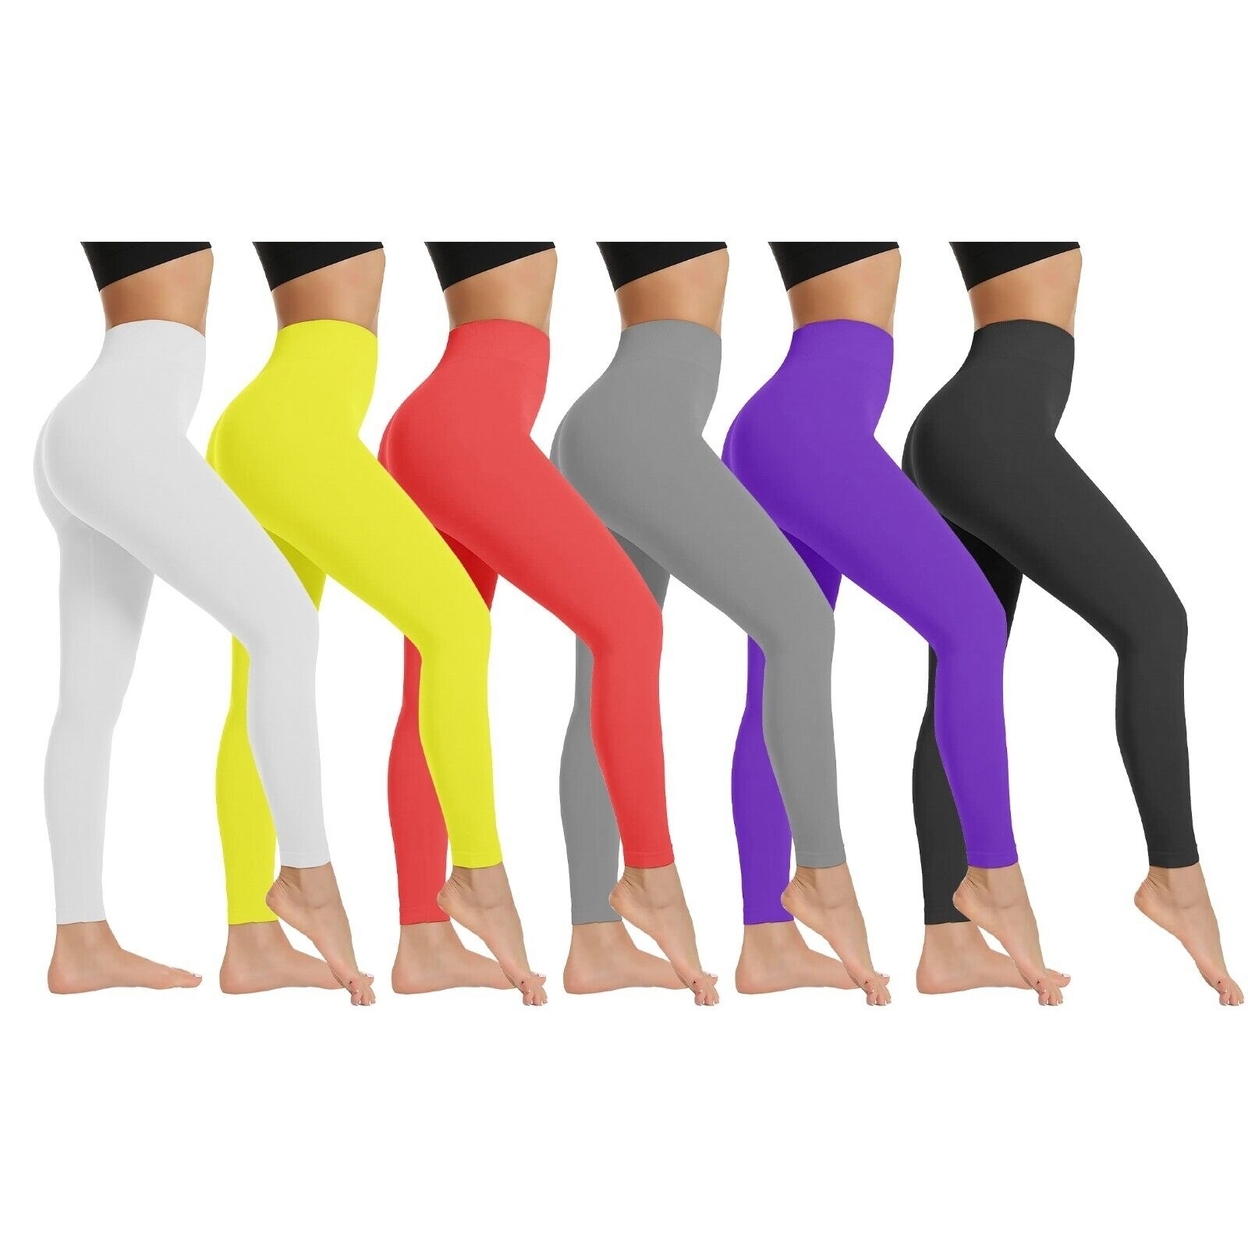 3-Pack: Women's High Waist Super Soft Active Athlete Stretch Yoga Cozy Leggings - Yellow,yellow,yellow,, Large